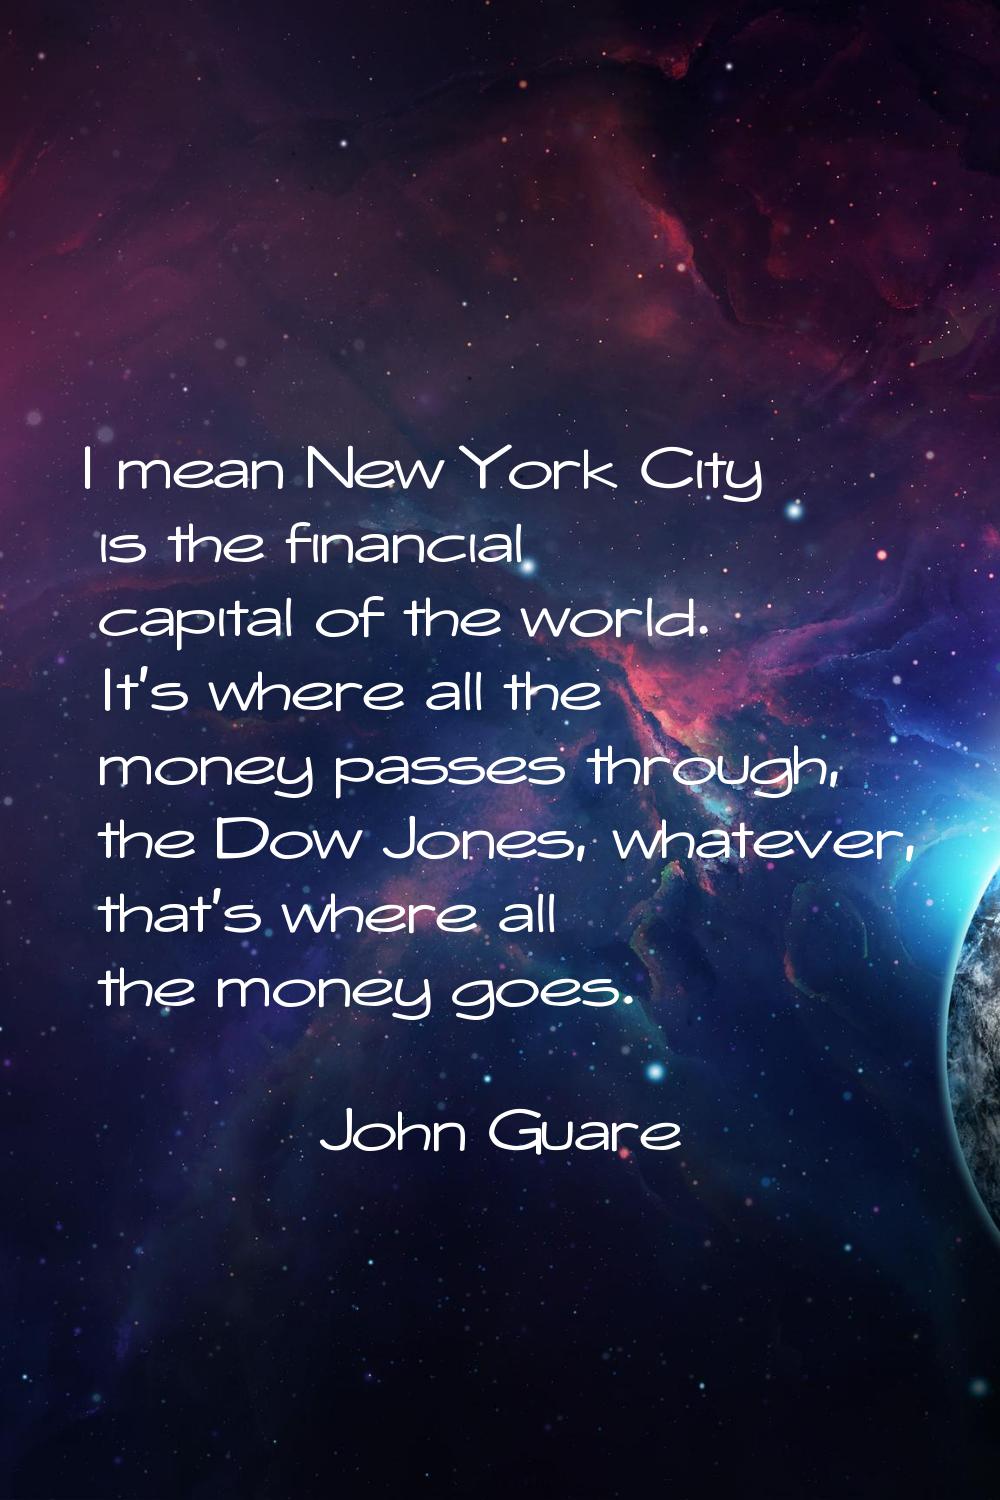 I mean New York City is the financial capital of the world. It's where all the money passes through